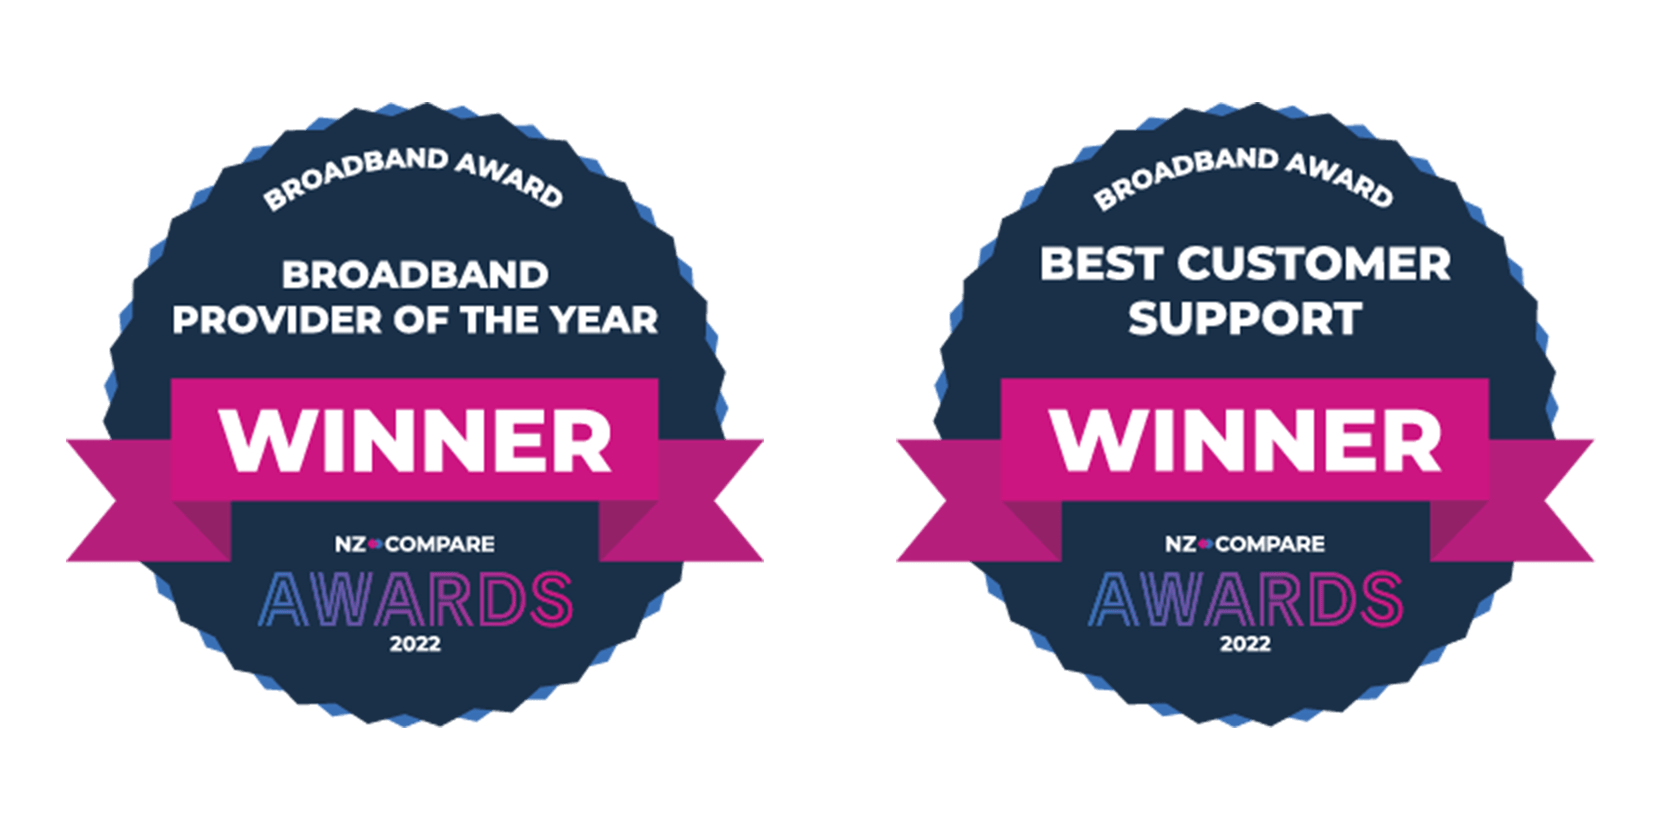 Icons for winning the NZ Compare awards for broadband provider of the year and best customer support